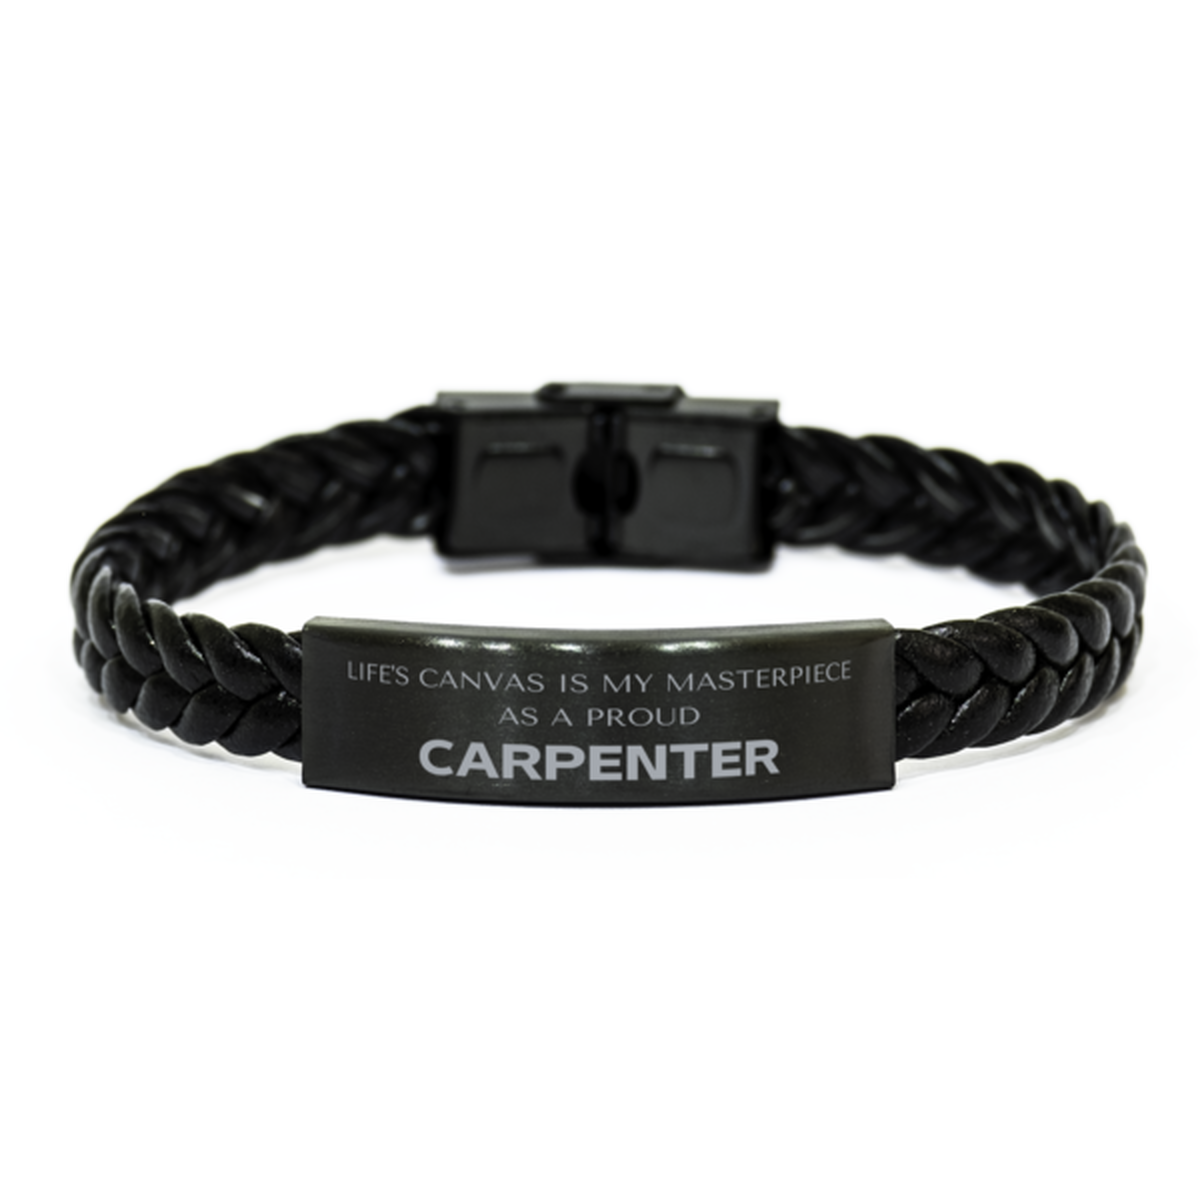 Proud Carpenter Gifts, Life's canvas is my masterpiece, Epic Birthday Christmas Unique Braided Leather Bracelet For Carpenter, Coworkers, Men, Women, Friends